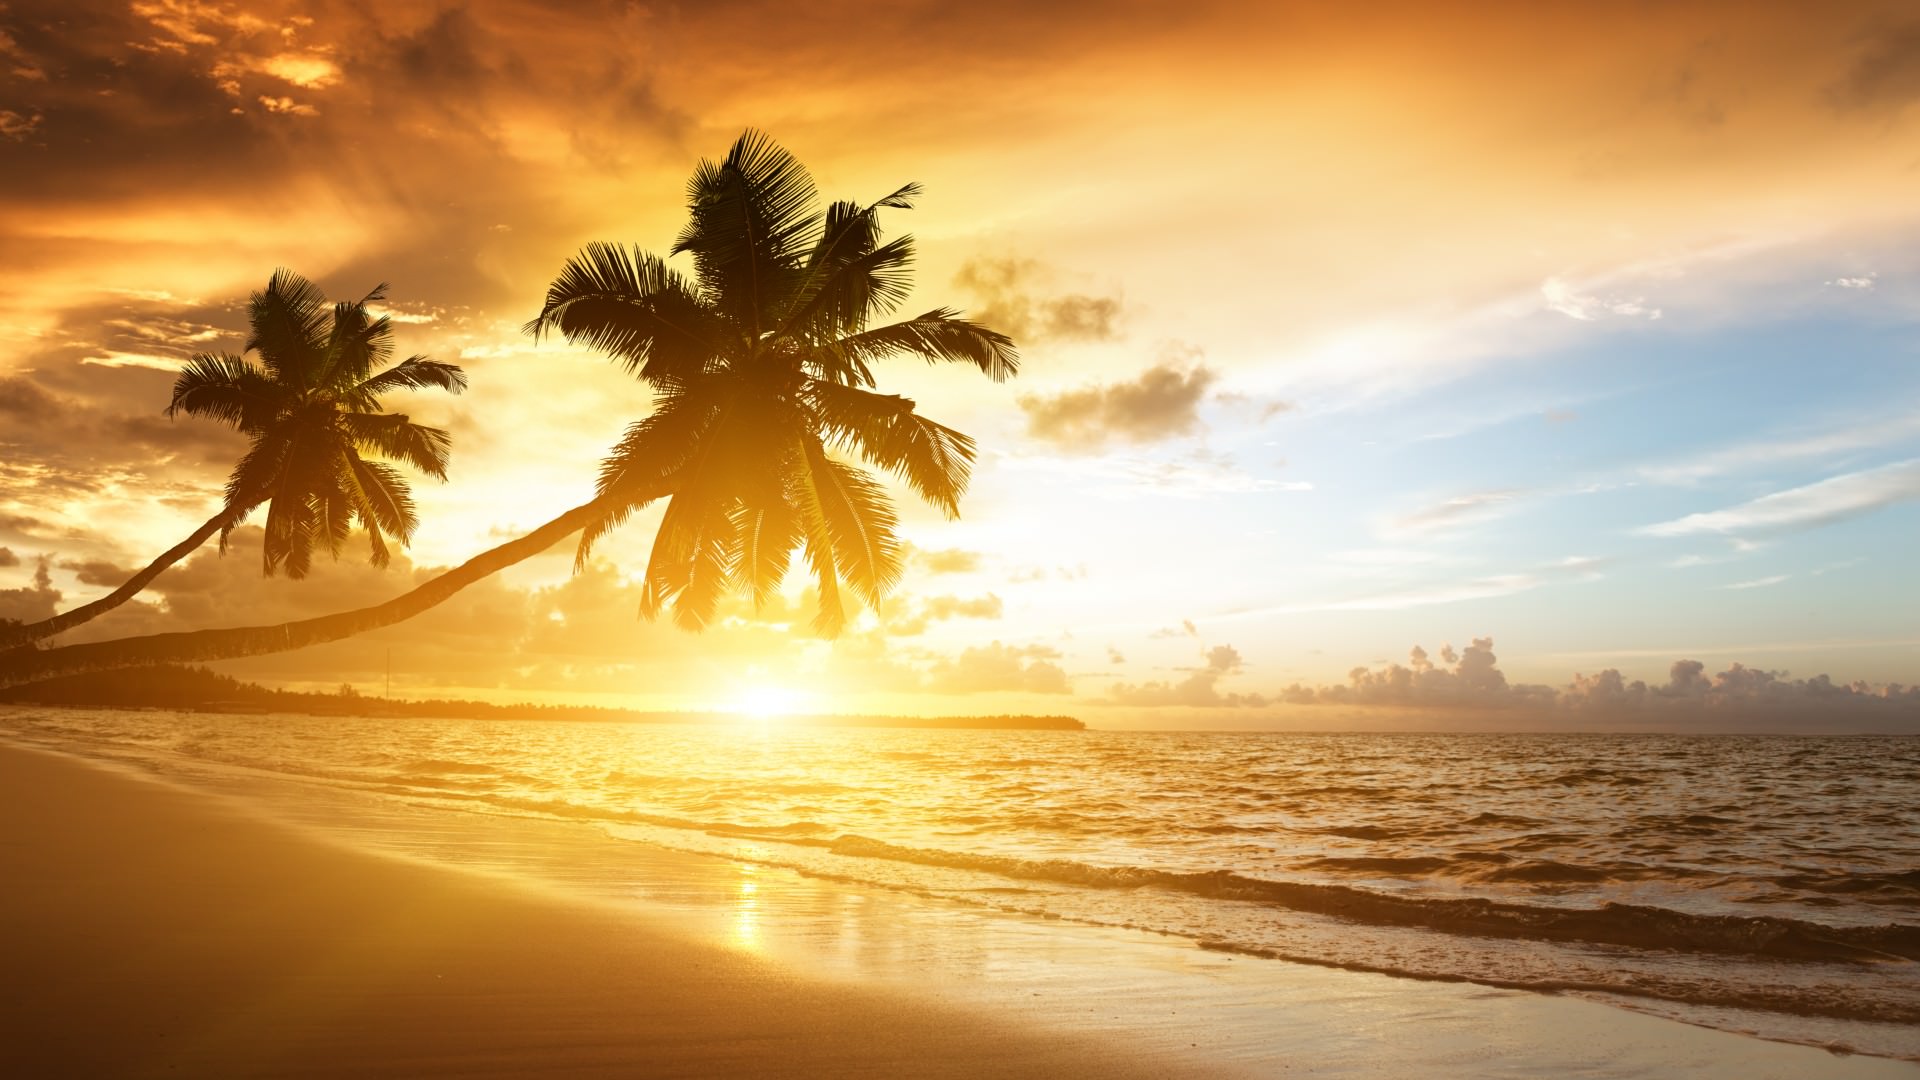 21 Beach Sunrise Wallpapers, Backgrounds, Images FreeCreatives